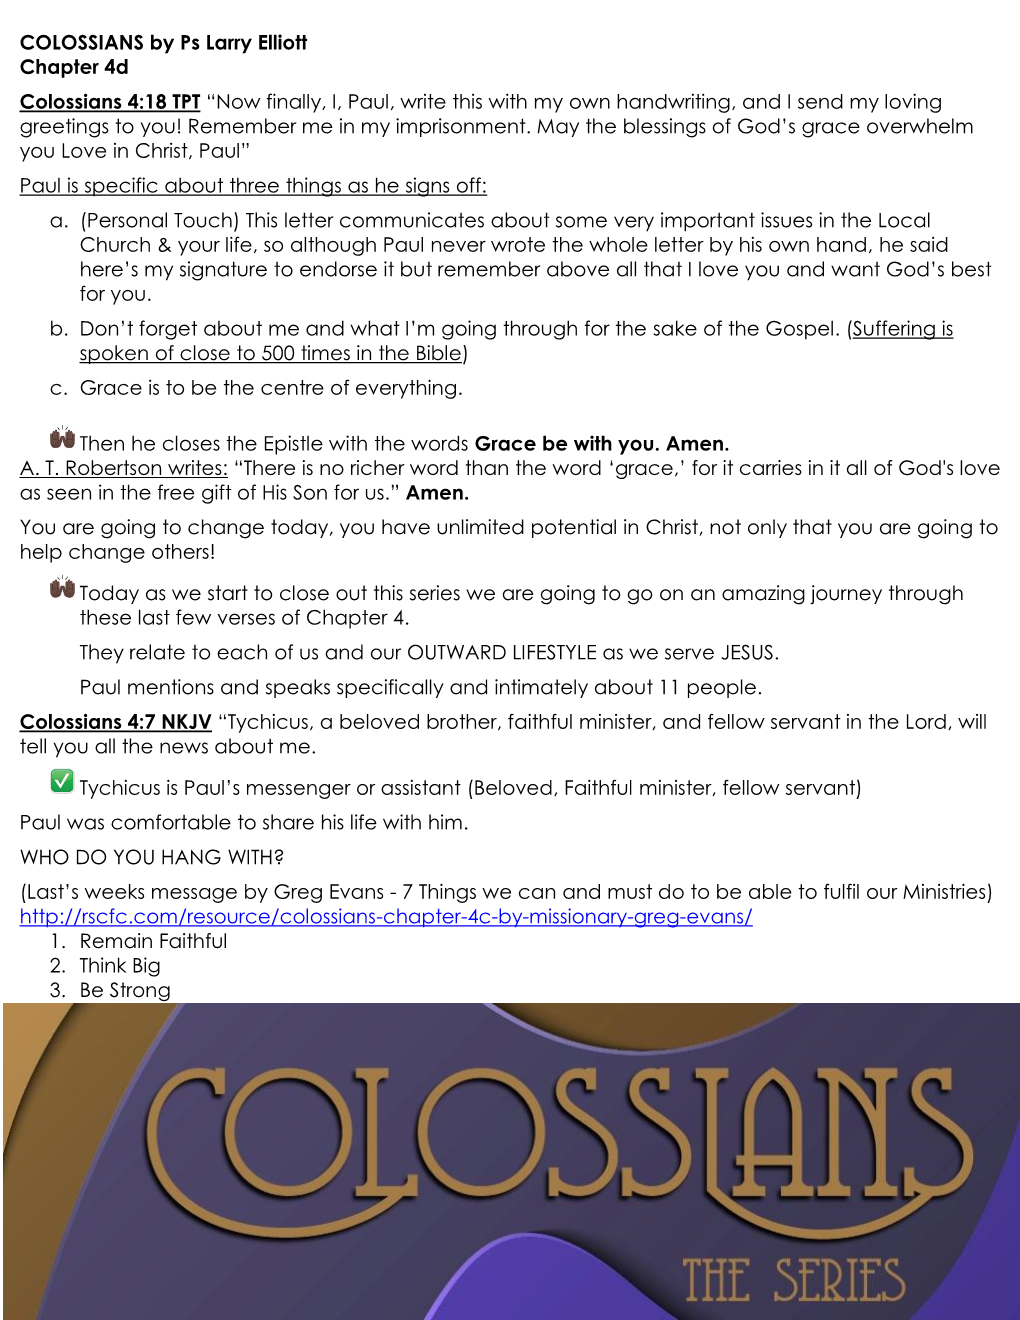 2019-10-13 Colossians Chapter 4D by Ps Larry Elliott